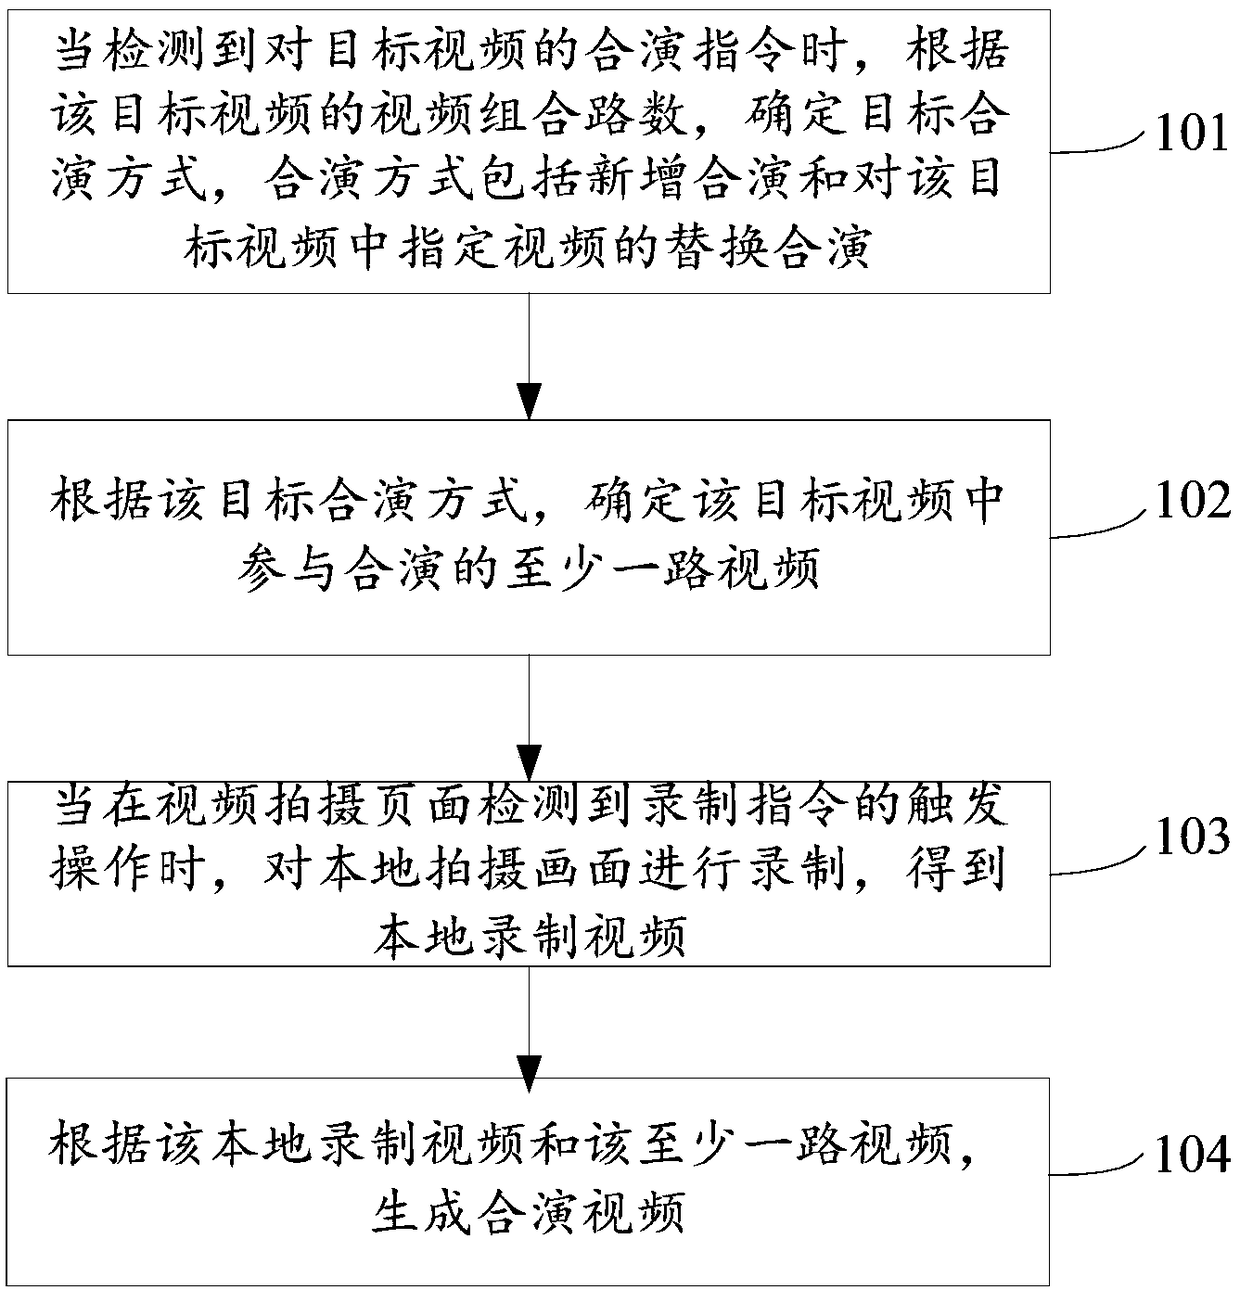 Video recording method and video recording device